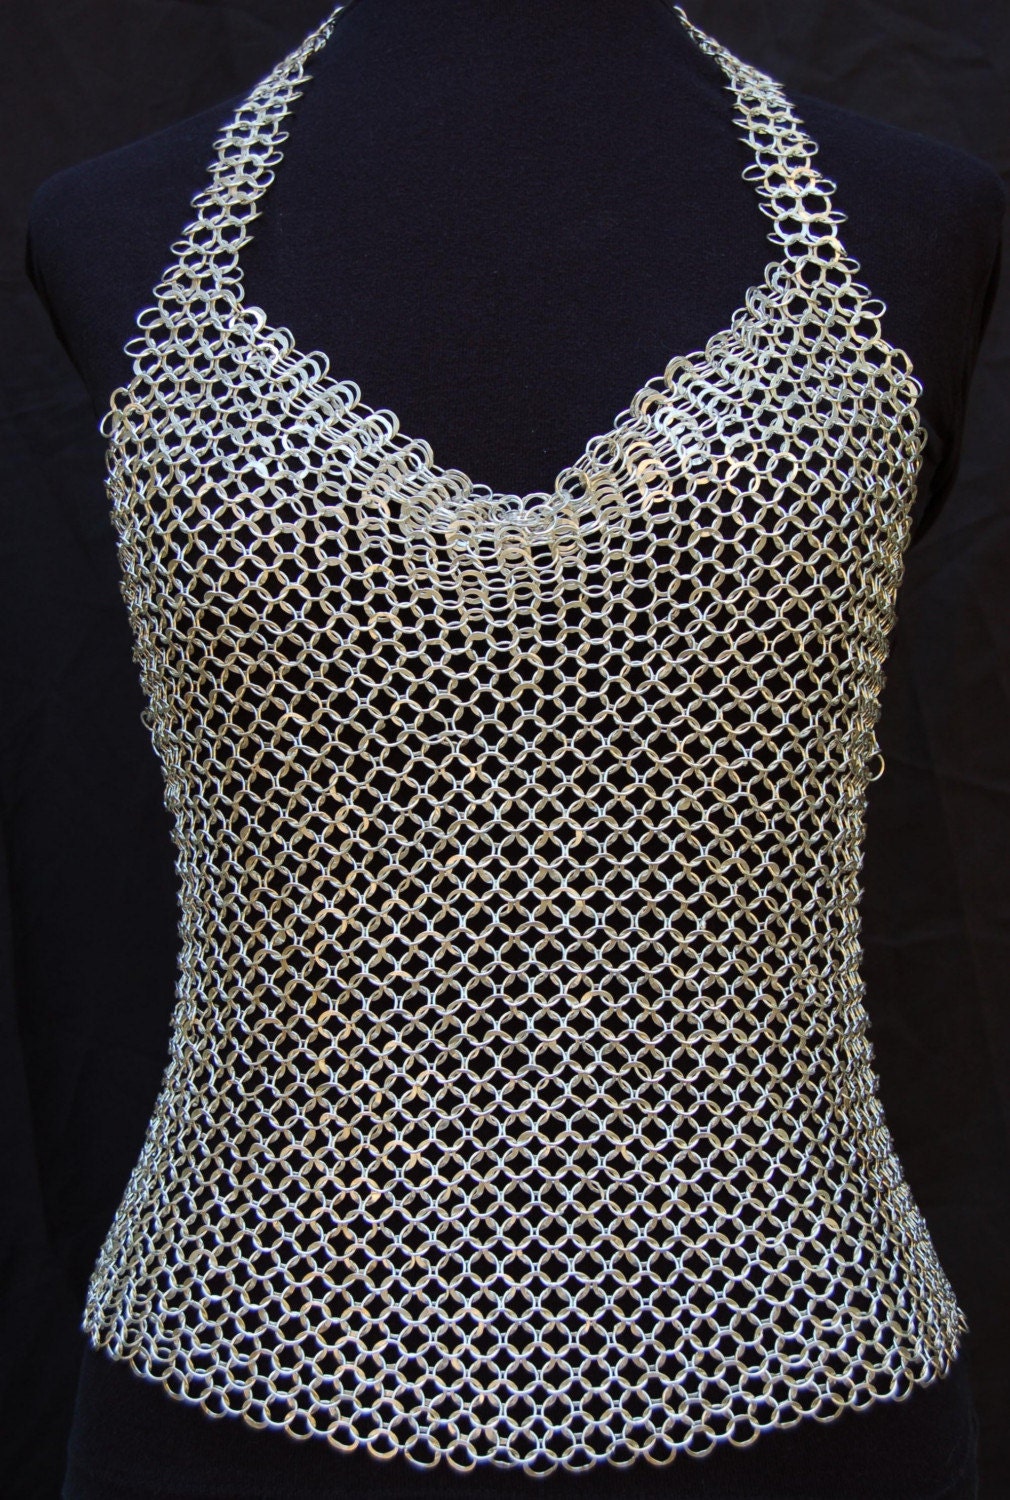 FREE CROCHETED HALTER TOP PATTERN - Cro
chet вЂ” Learn How to Crochet